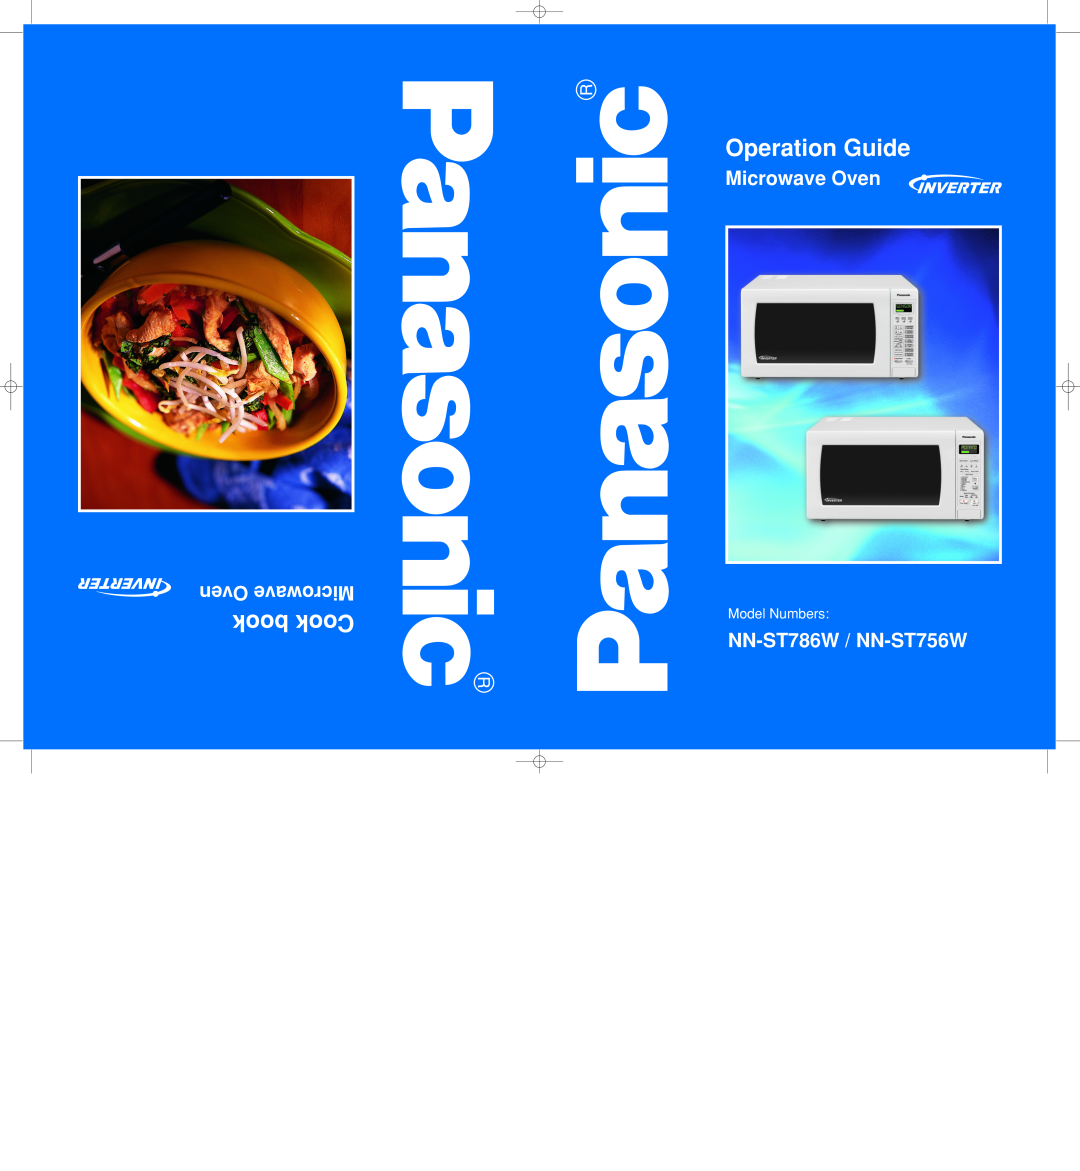 Panasonic manual Operation Guide, book Cook, Microwave Oven, Oven Microwave, NN-ST786W / NN-ST756W, Model Numbers 